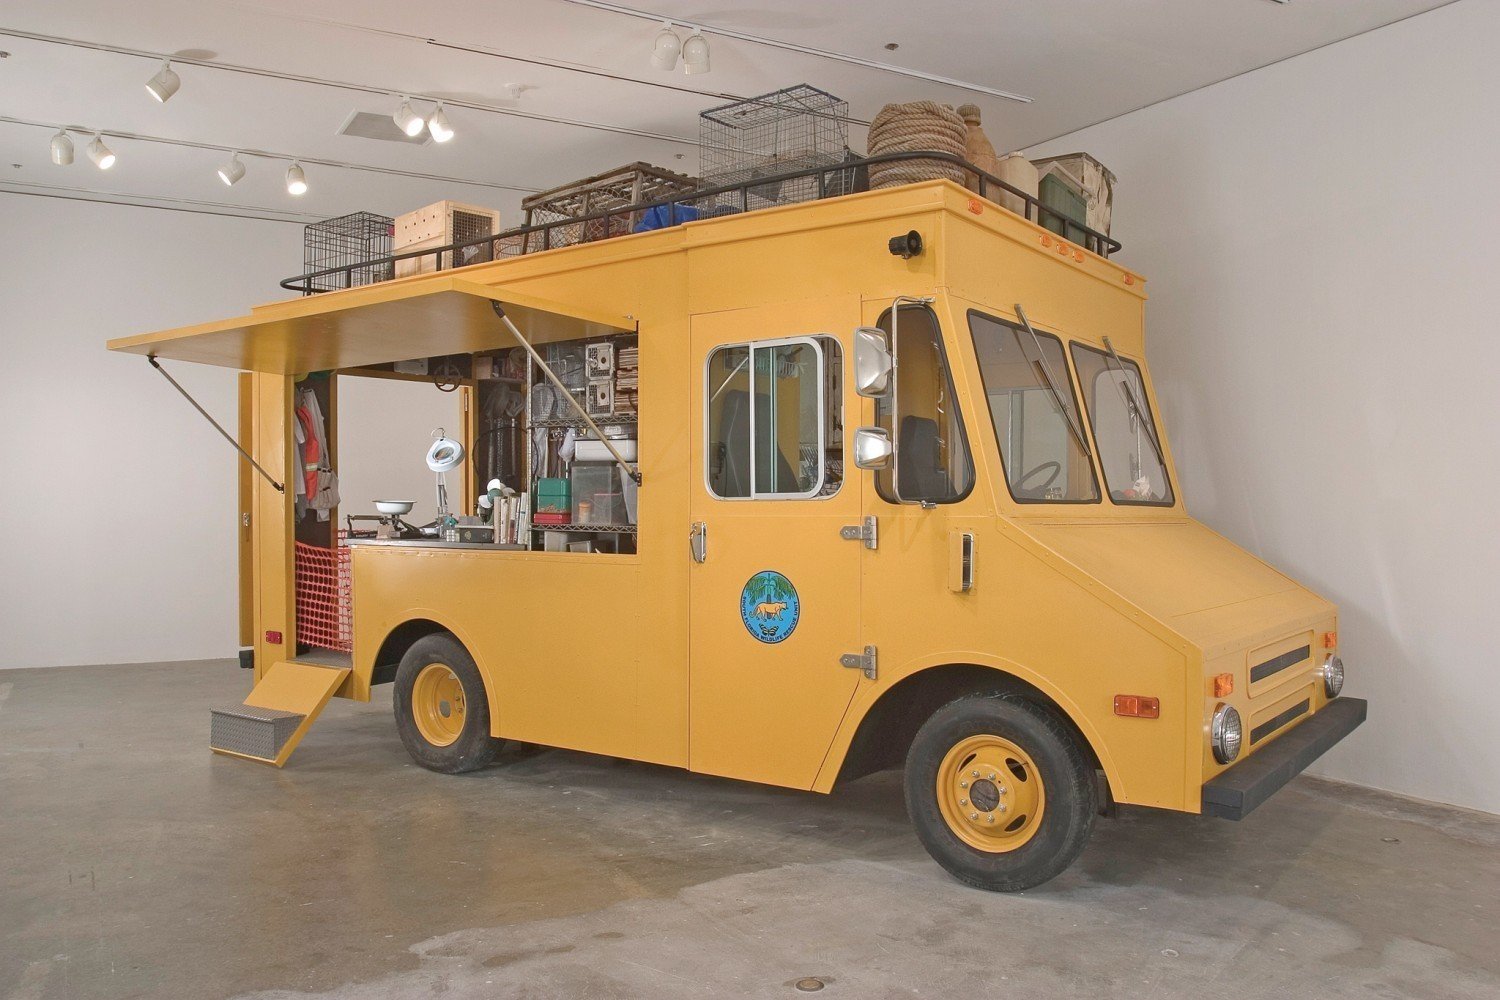 Mark Dion, The South Florida Wildlife Rescue Unit: Mobile Laboratory, 2006